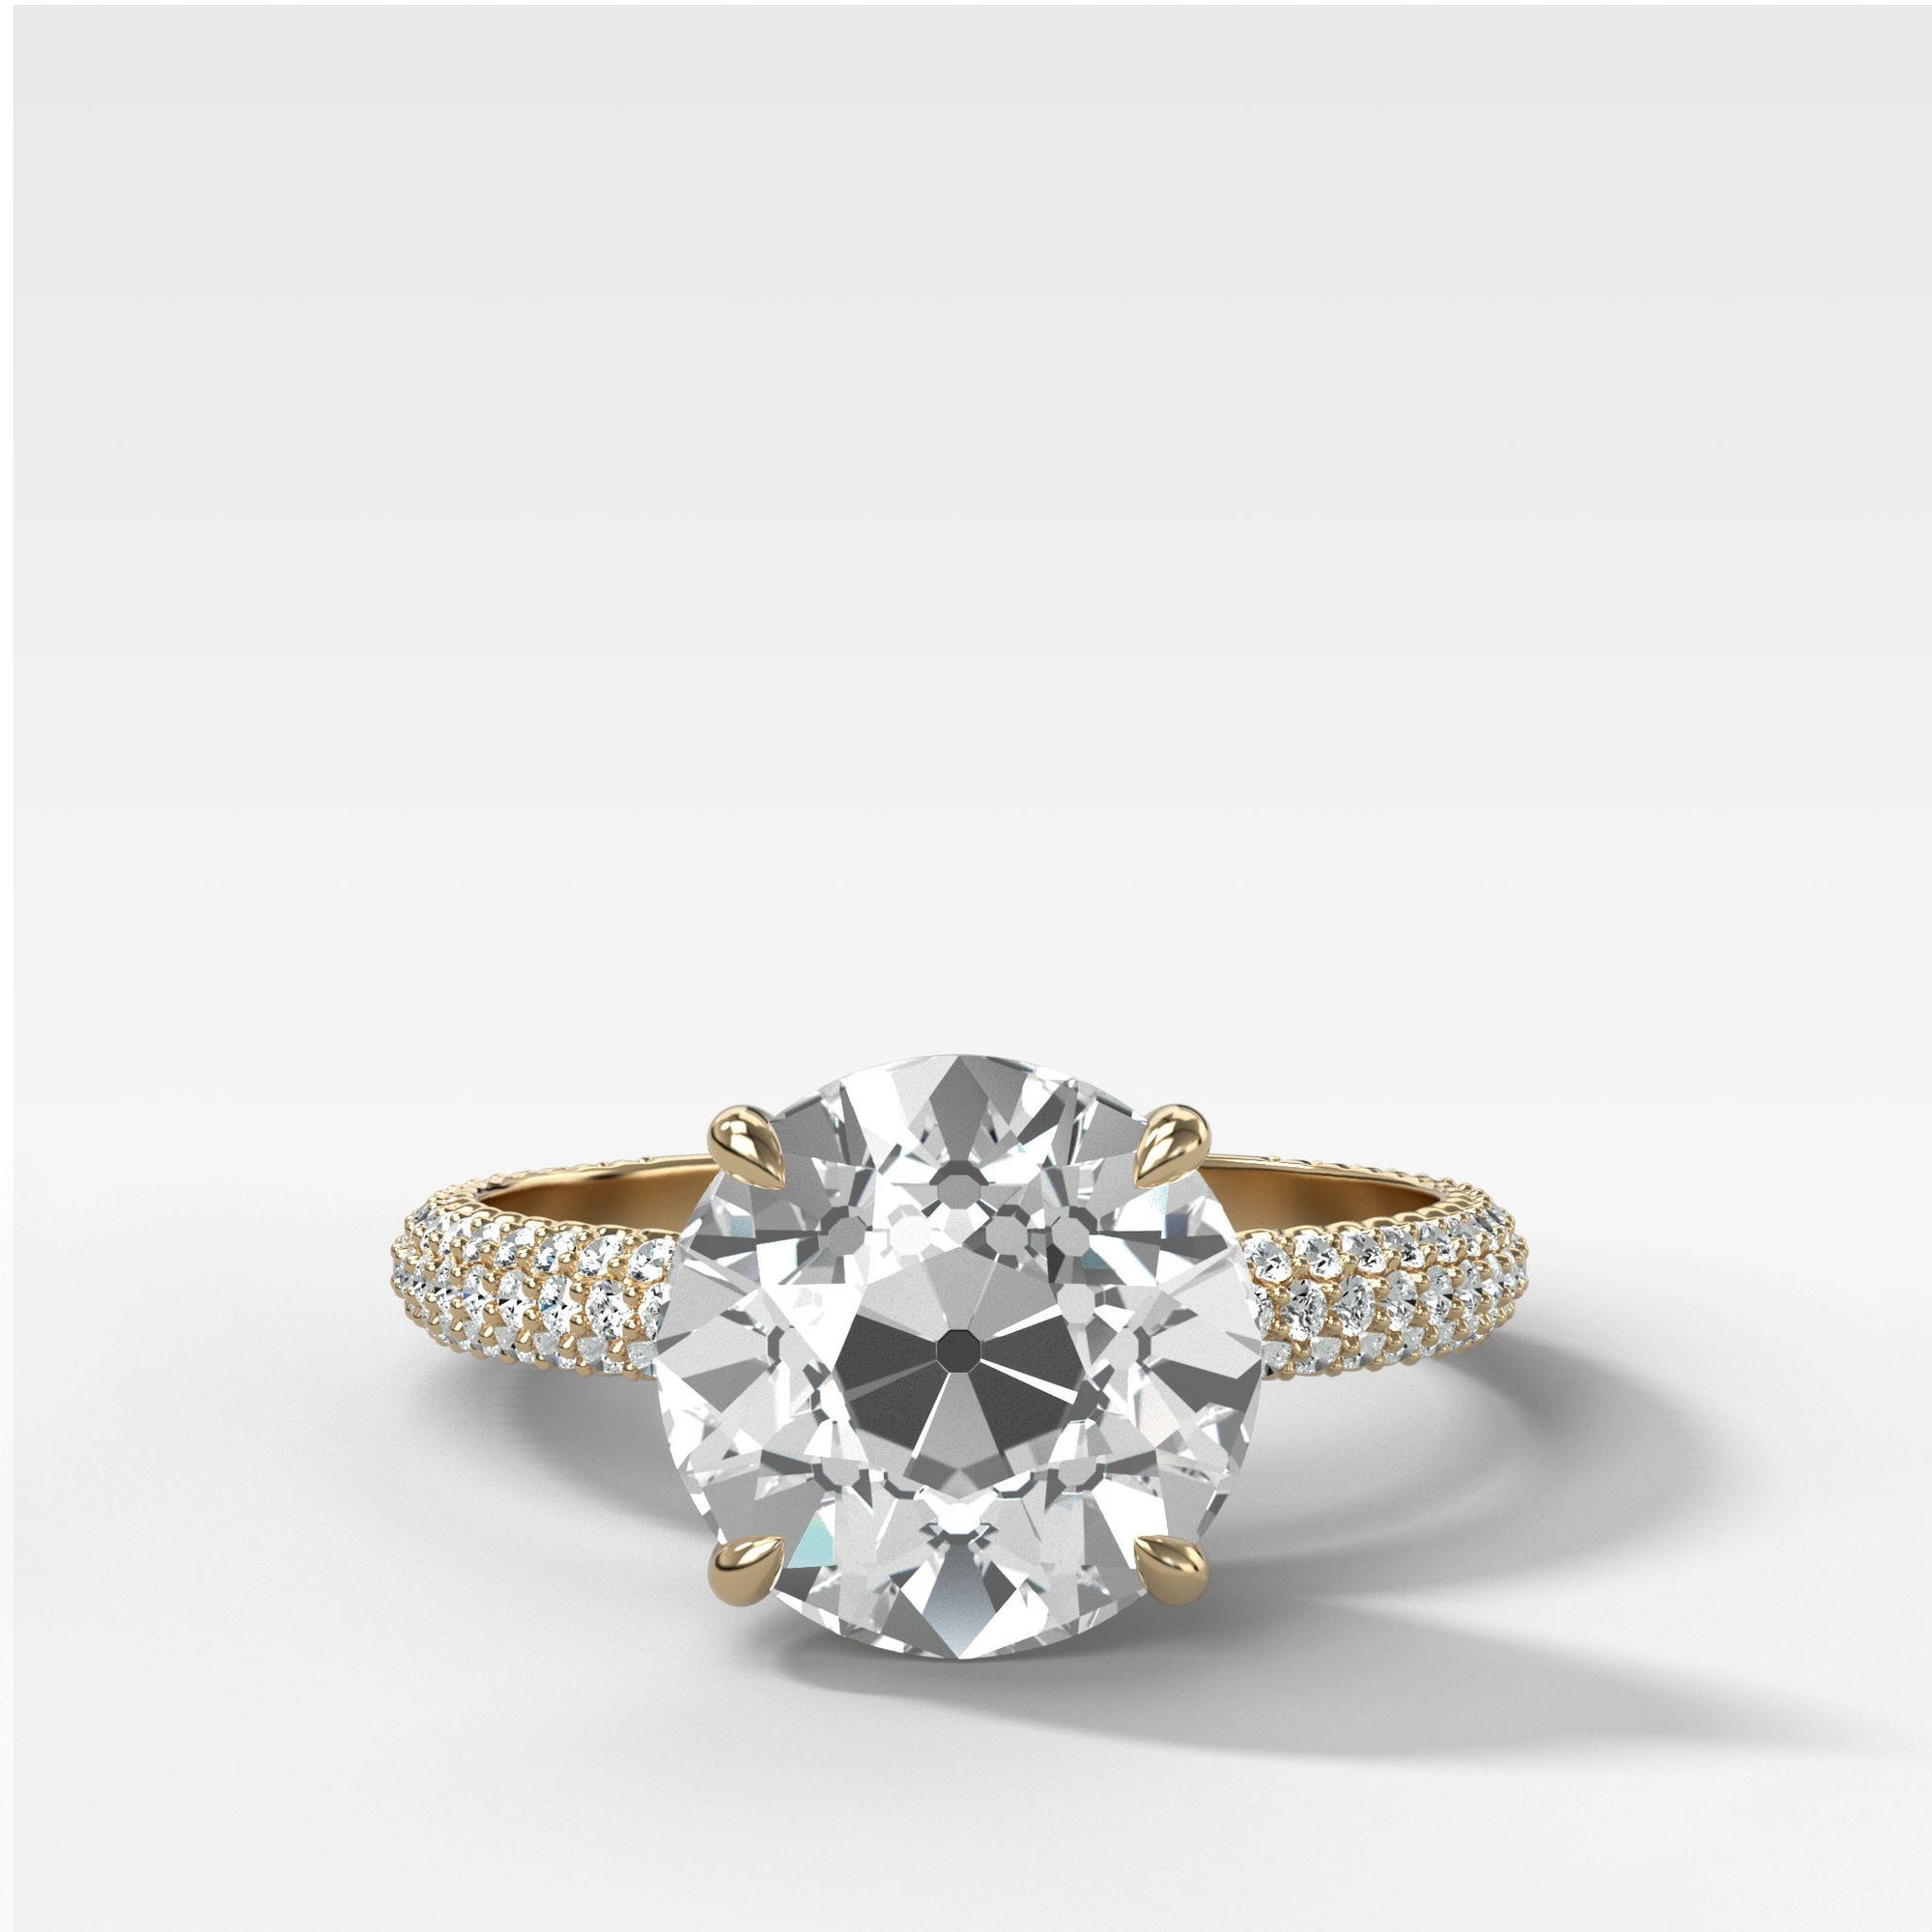 Triple Row Pav≈Ω Engagement Ring With Old Euro Cut by Good Stone in Yellow Gold